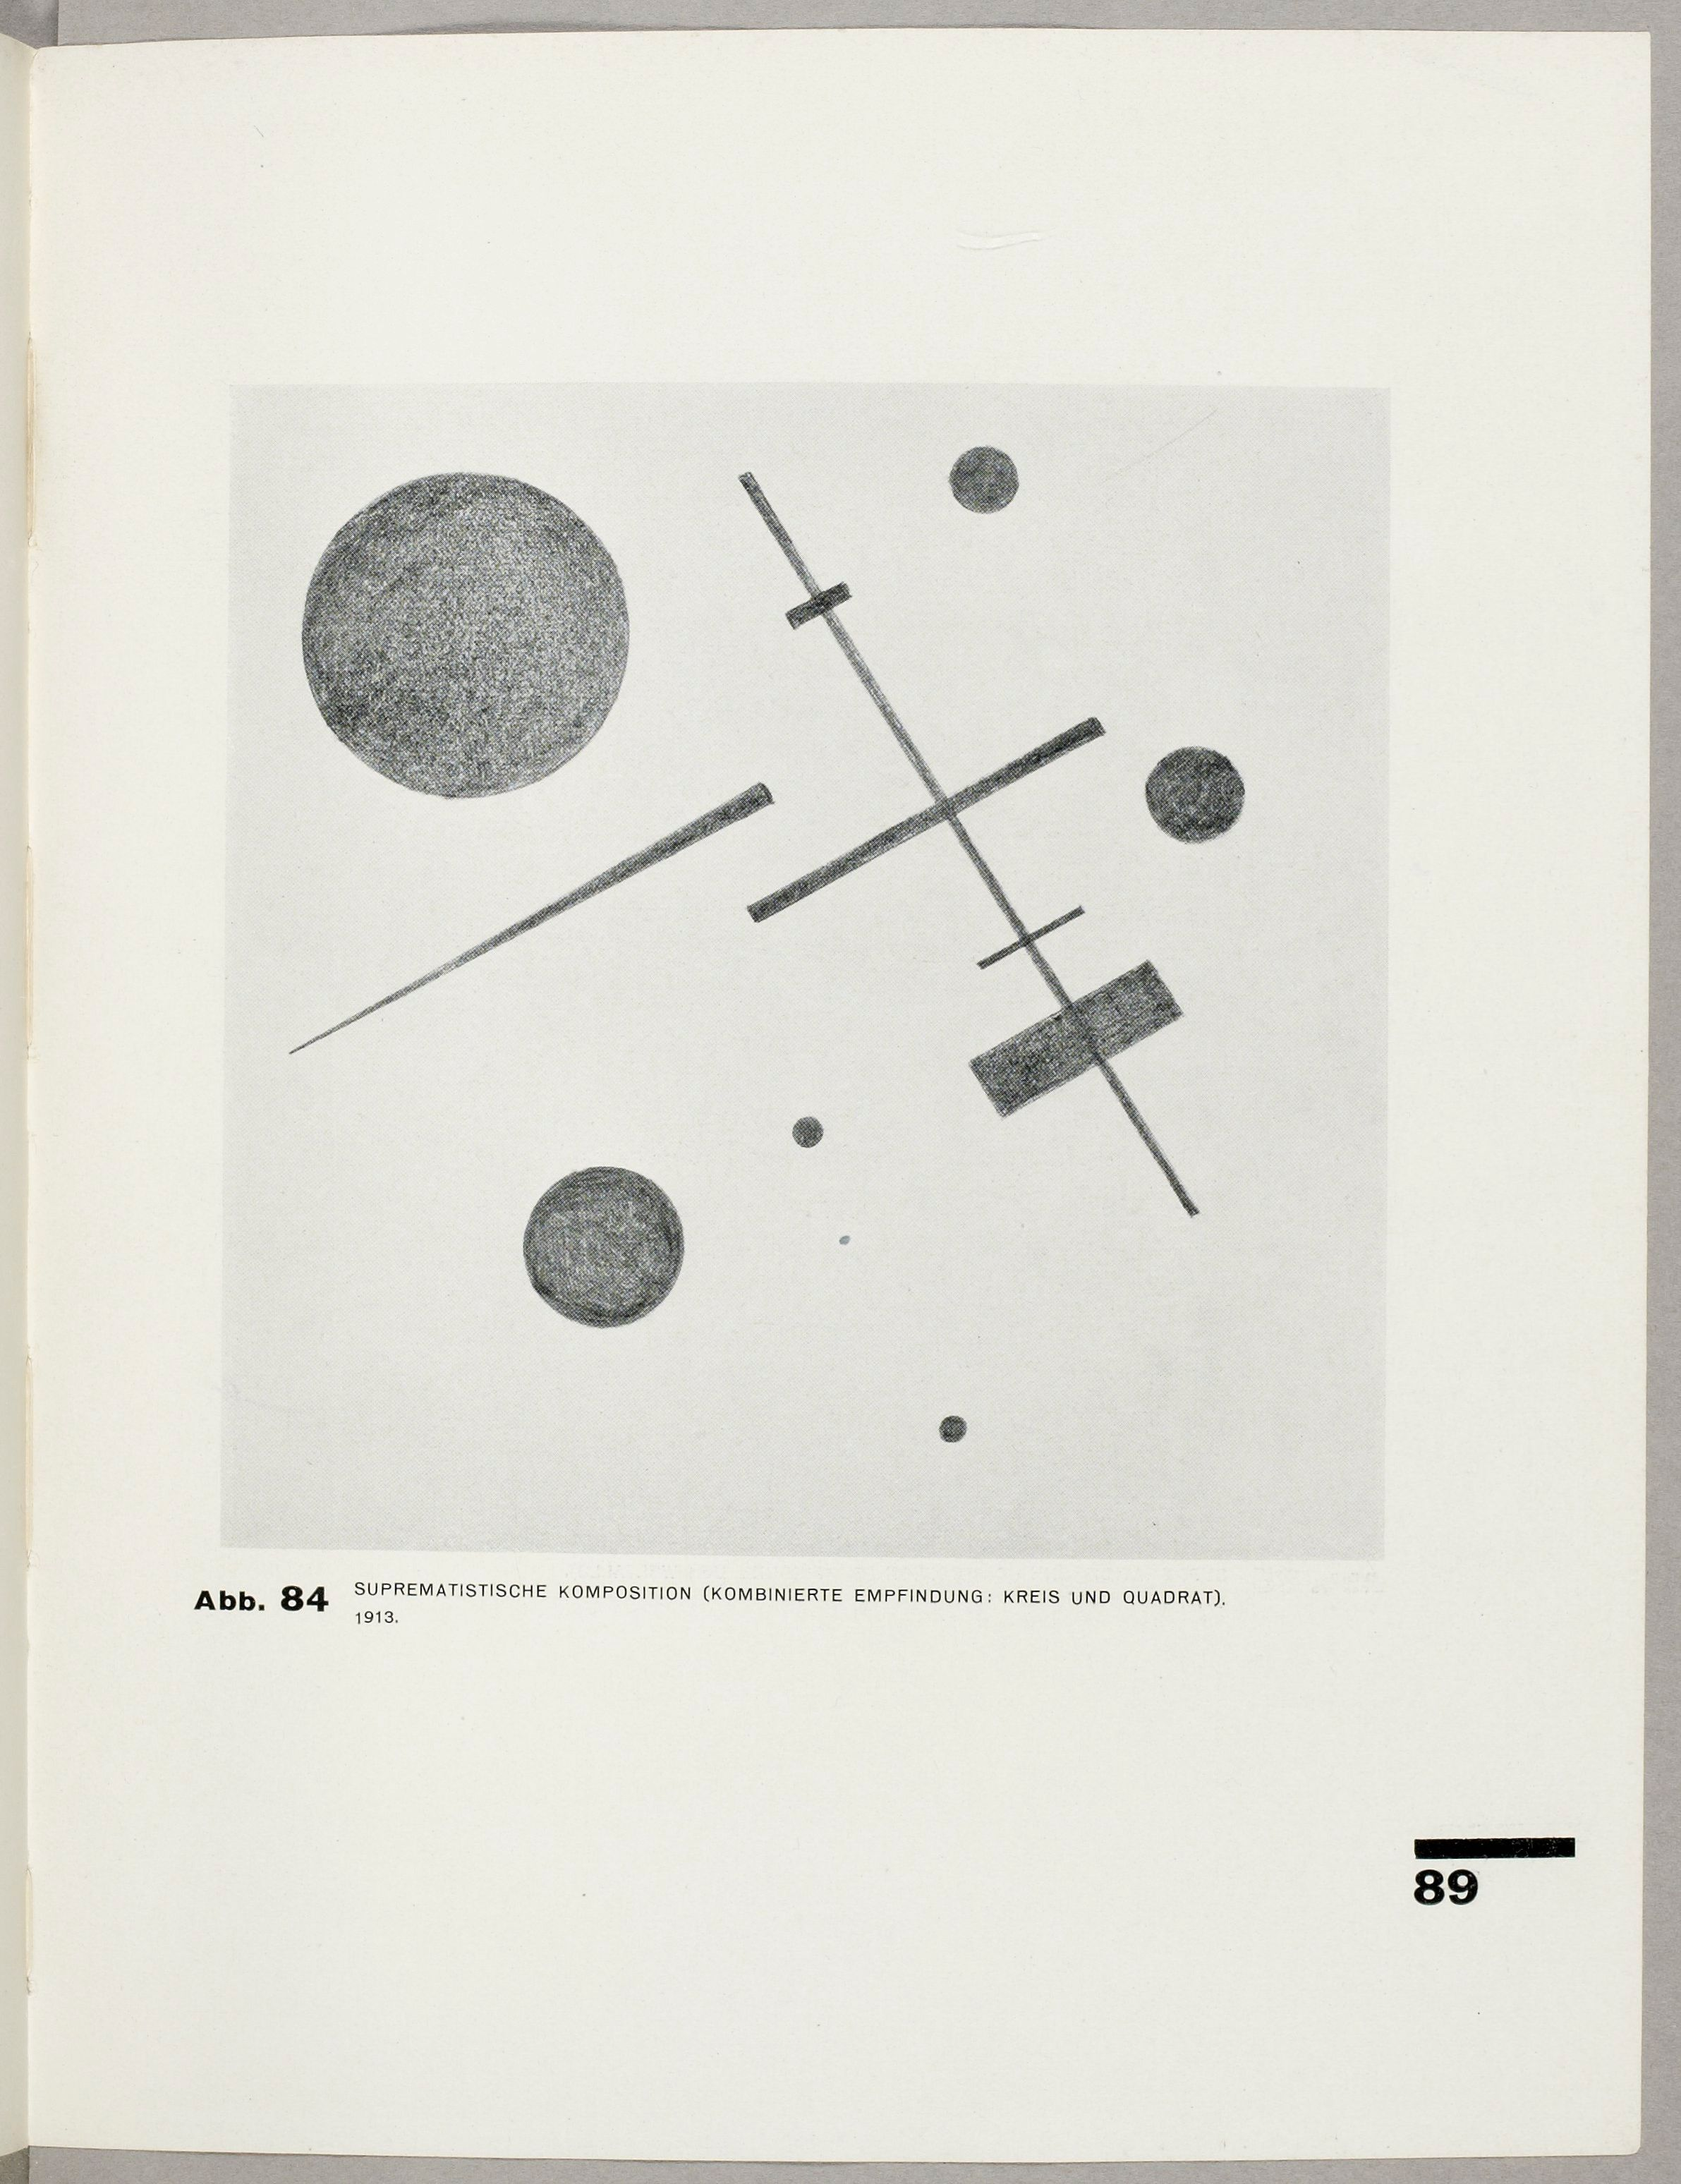 Suprematistic composition (Combined feeling: Circle and square) (1927).